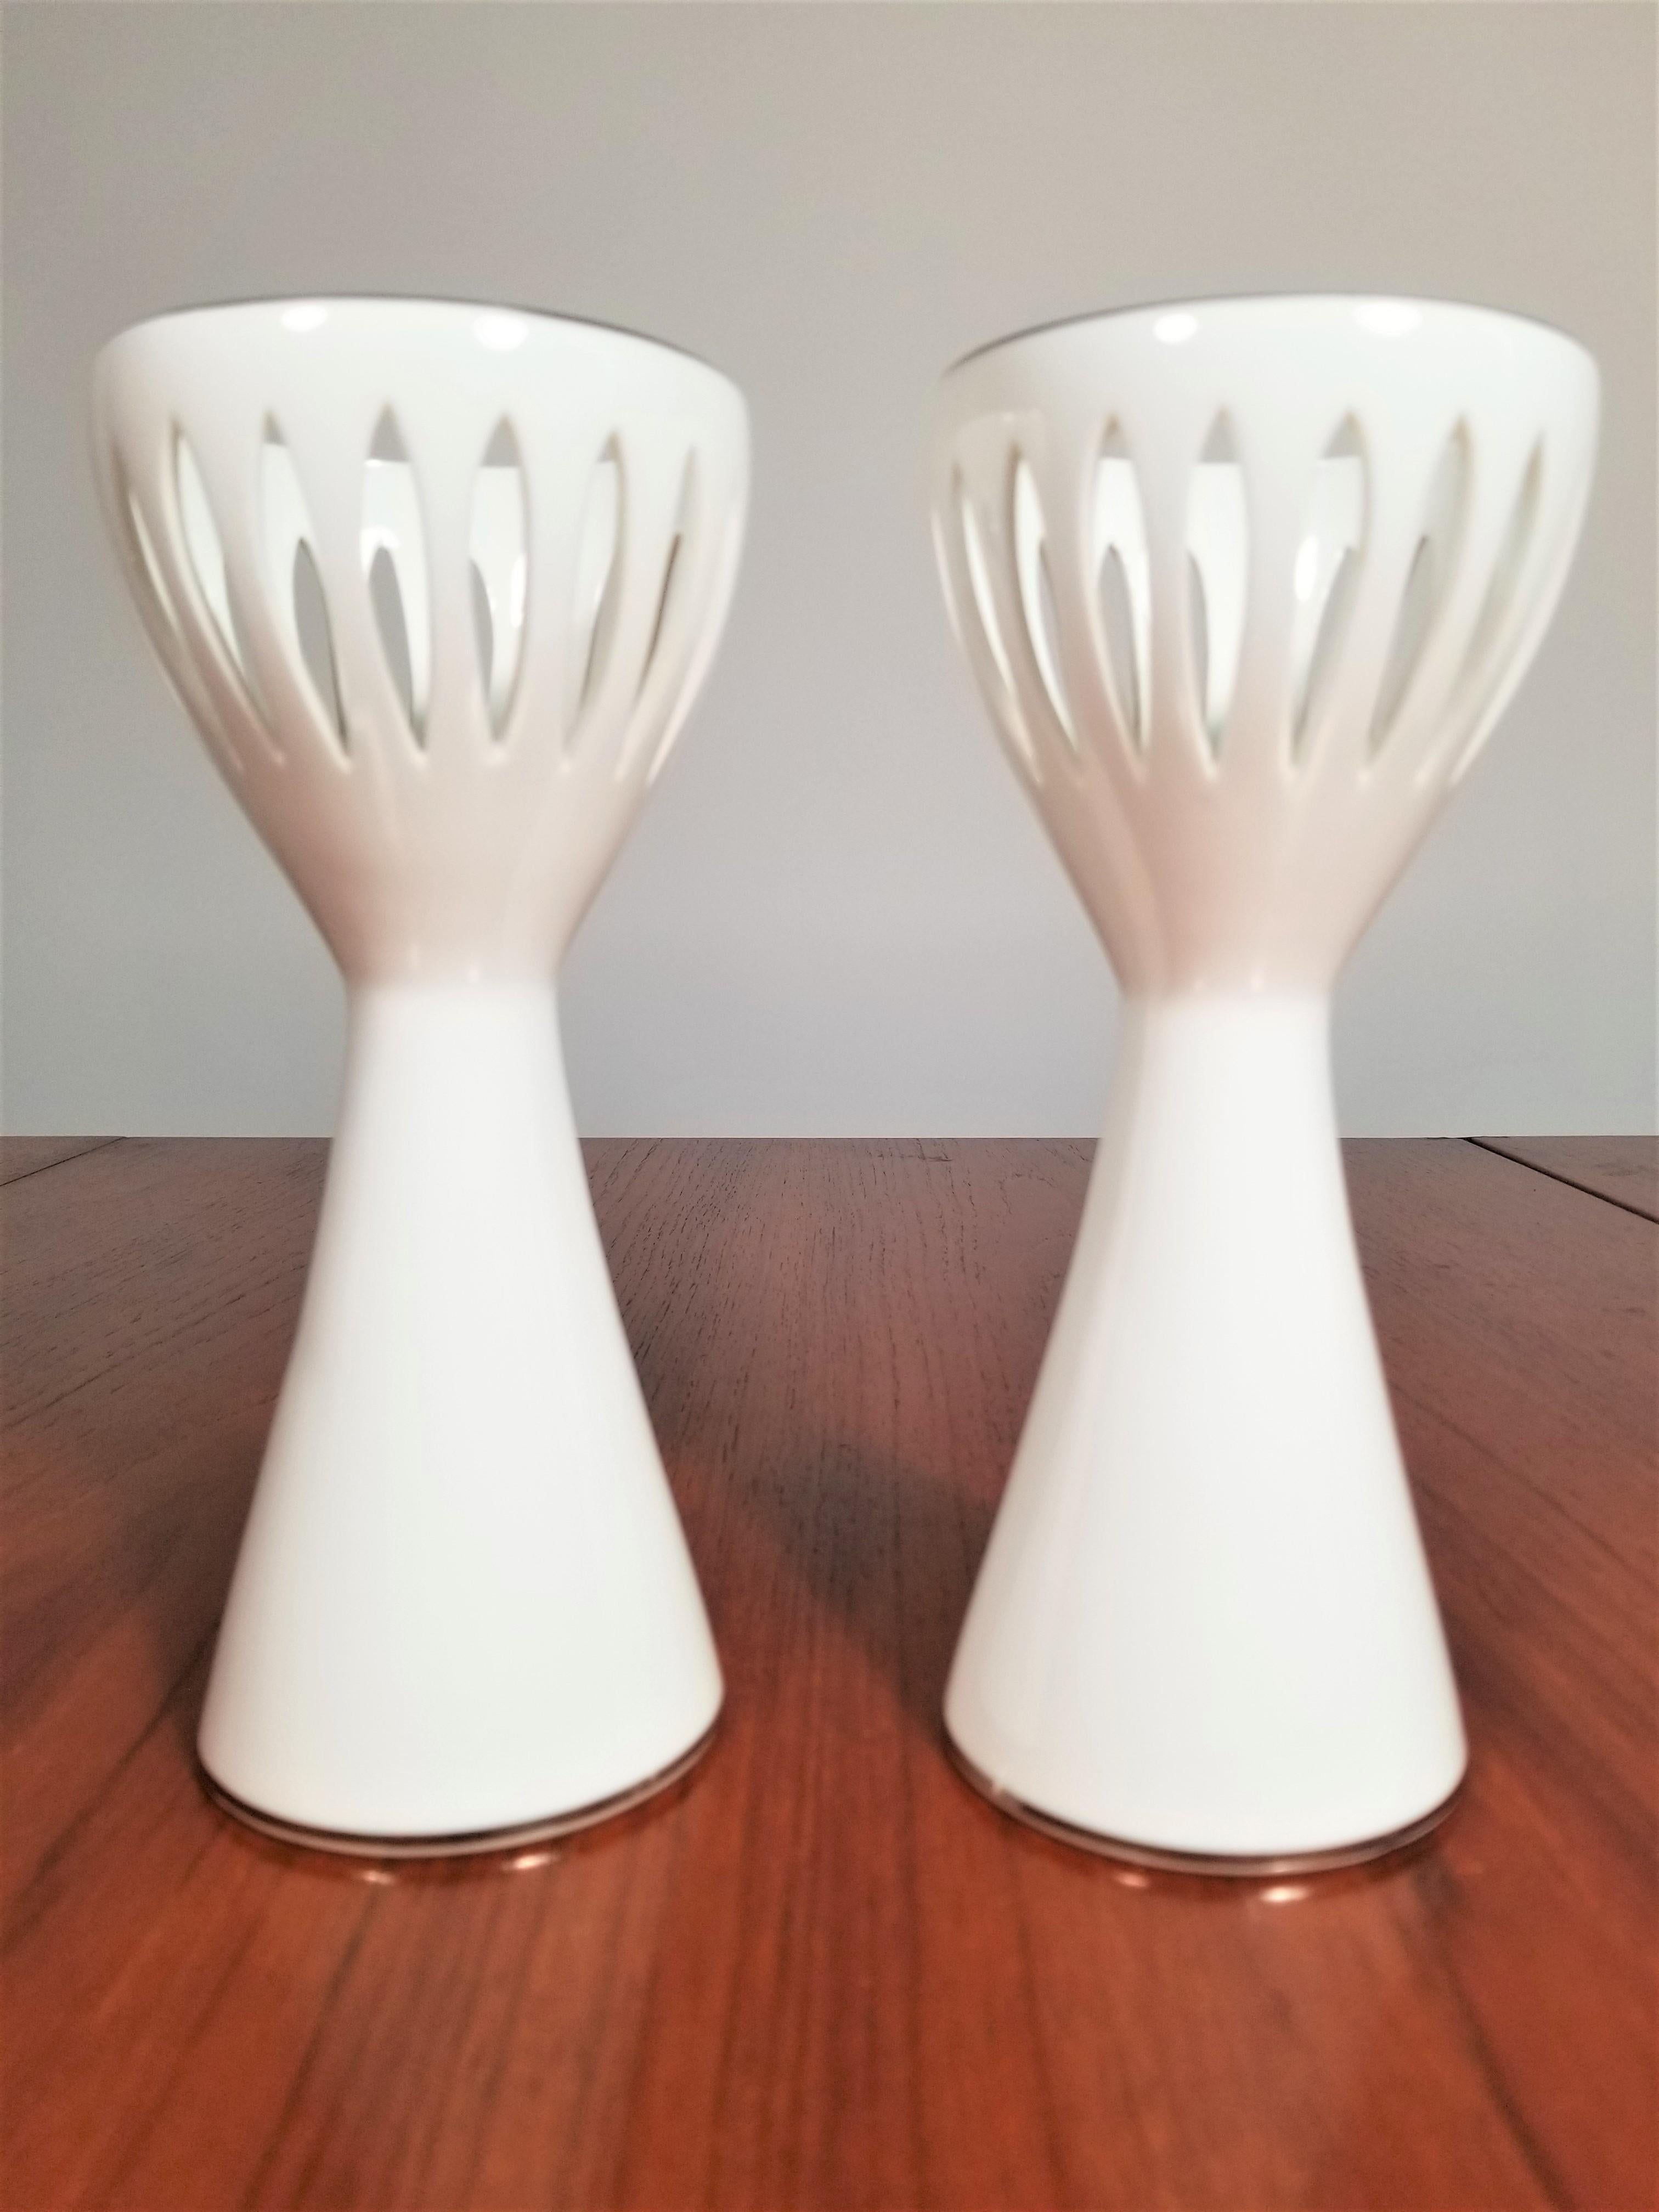 Pair of Mid-Century Candlesticks or Candleholders.  Fine White Bone China with Silver Trim.. Mid-Century 1960s Mod sculptural design. Makers marking on bottom. Excellent condition.